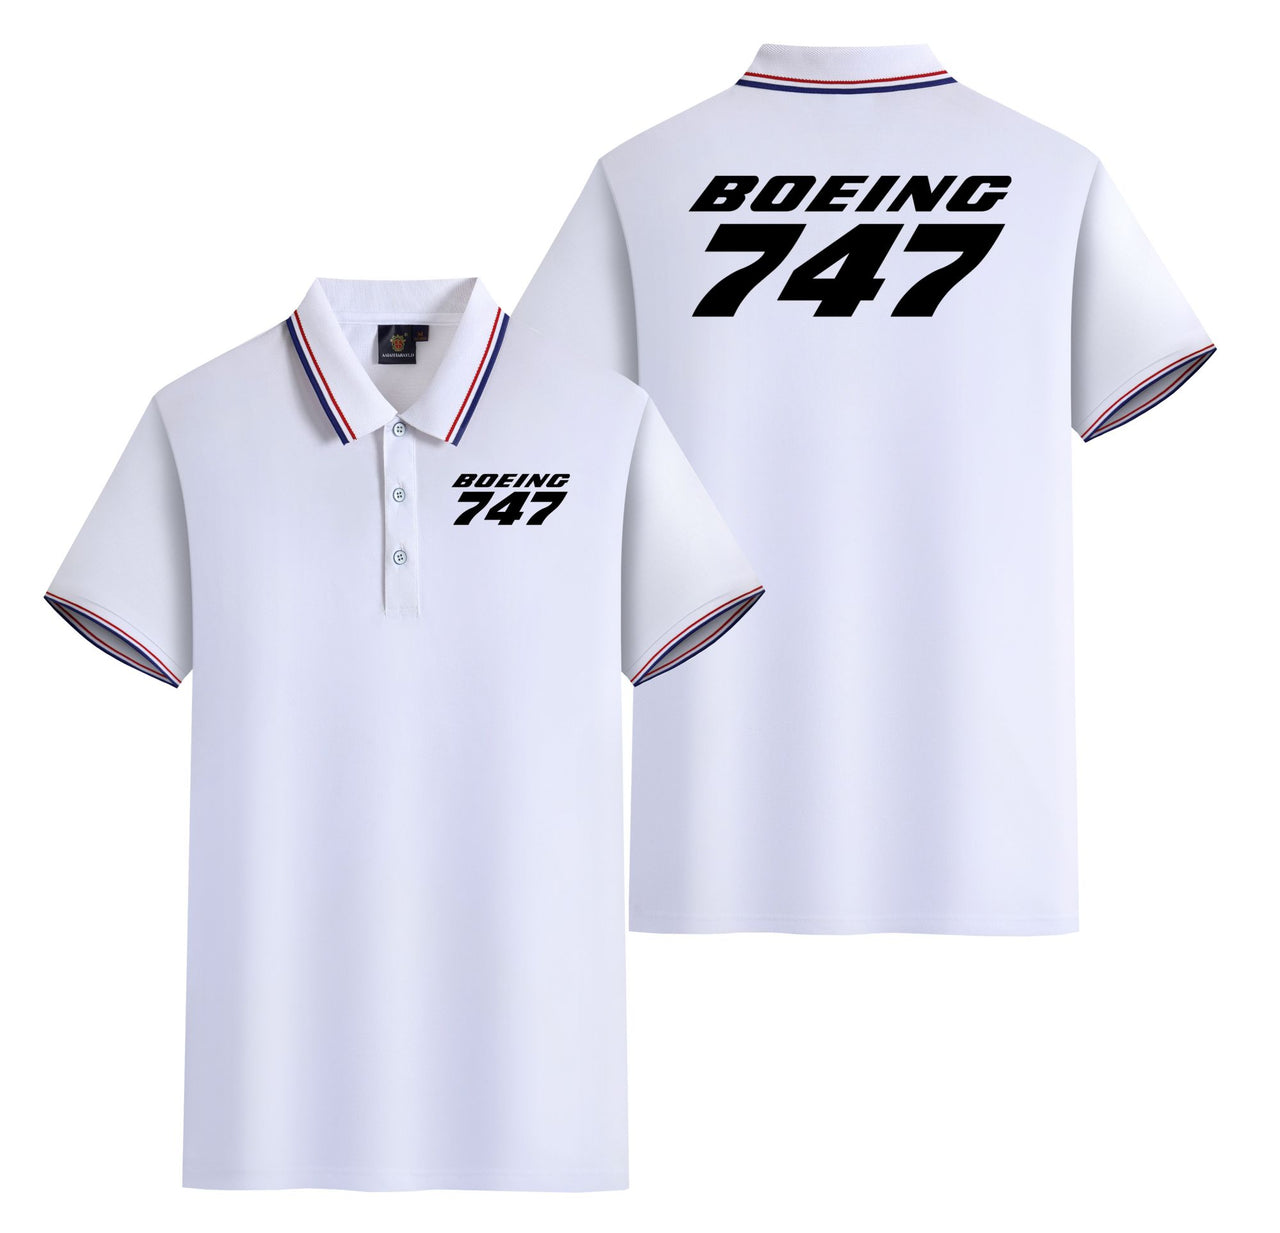 Boeing 747 & Text Designed Stylish Polo T-Shirts (Double-Side)